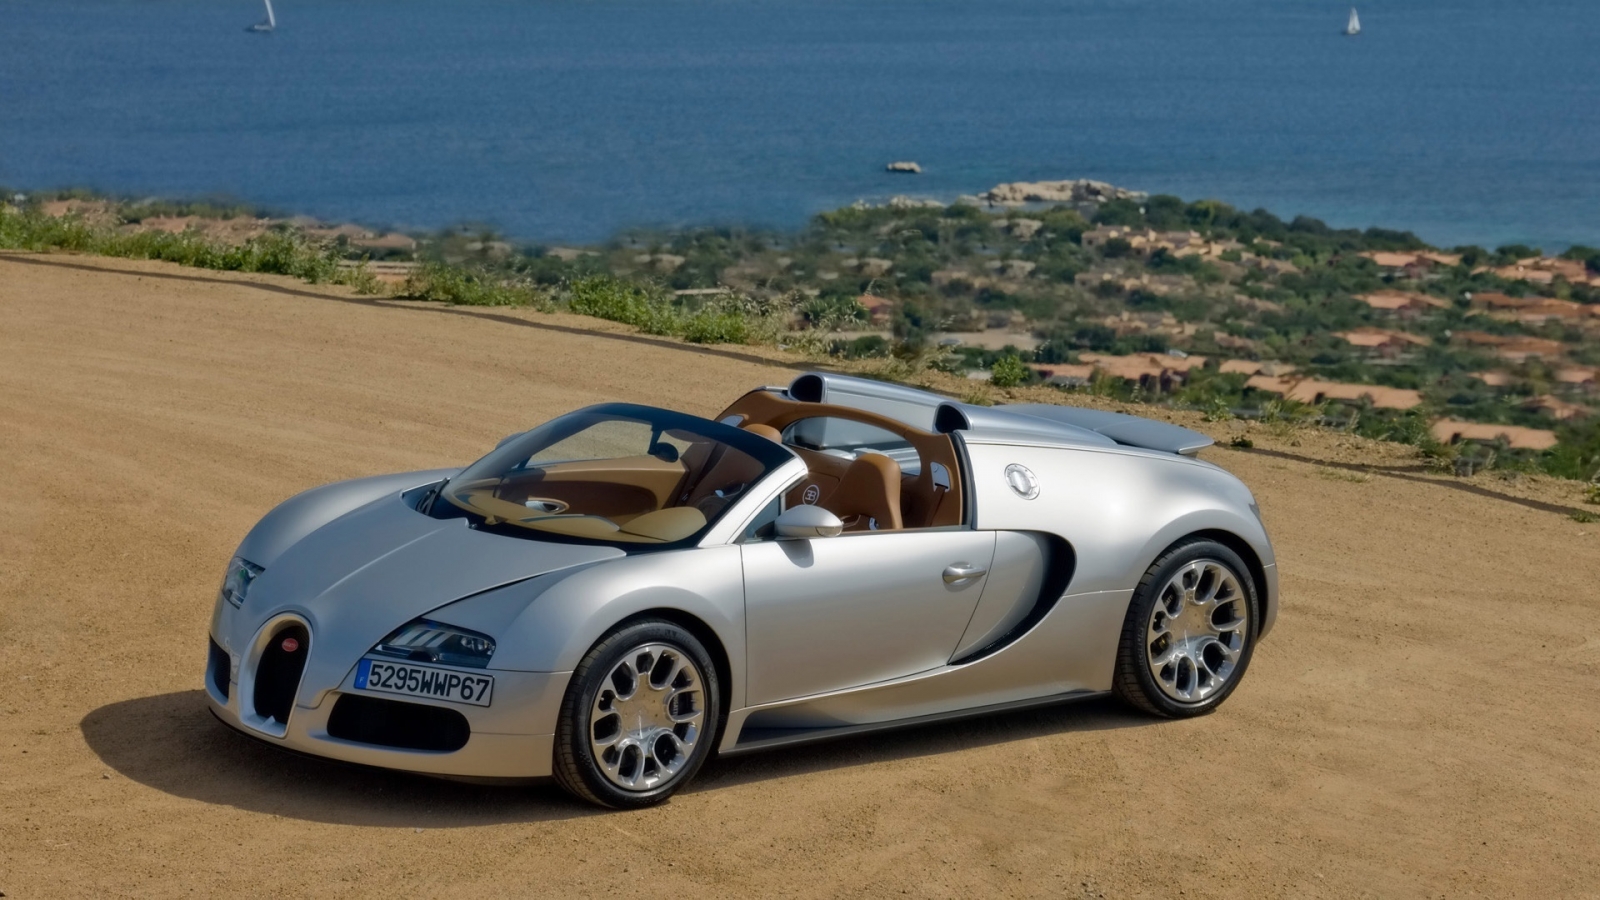 Bugatti Veyron 16.4 Grand Sport 2010 in Sardinia - Front And Side Panorama for 1600 x 900 HDTV resolution